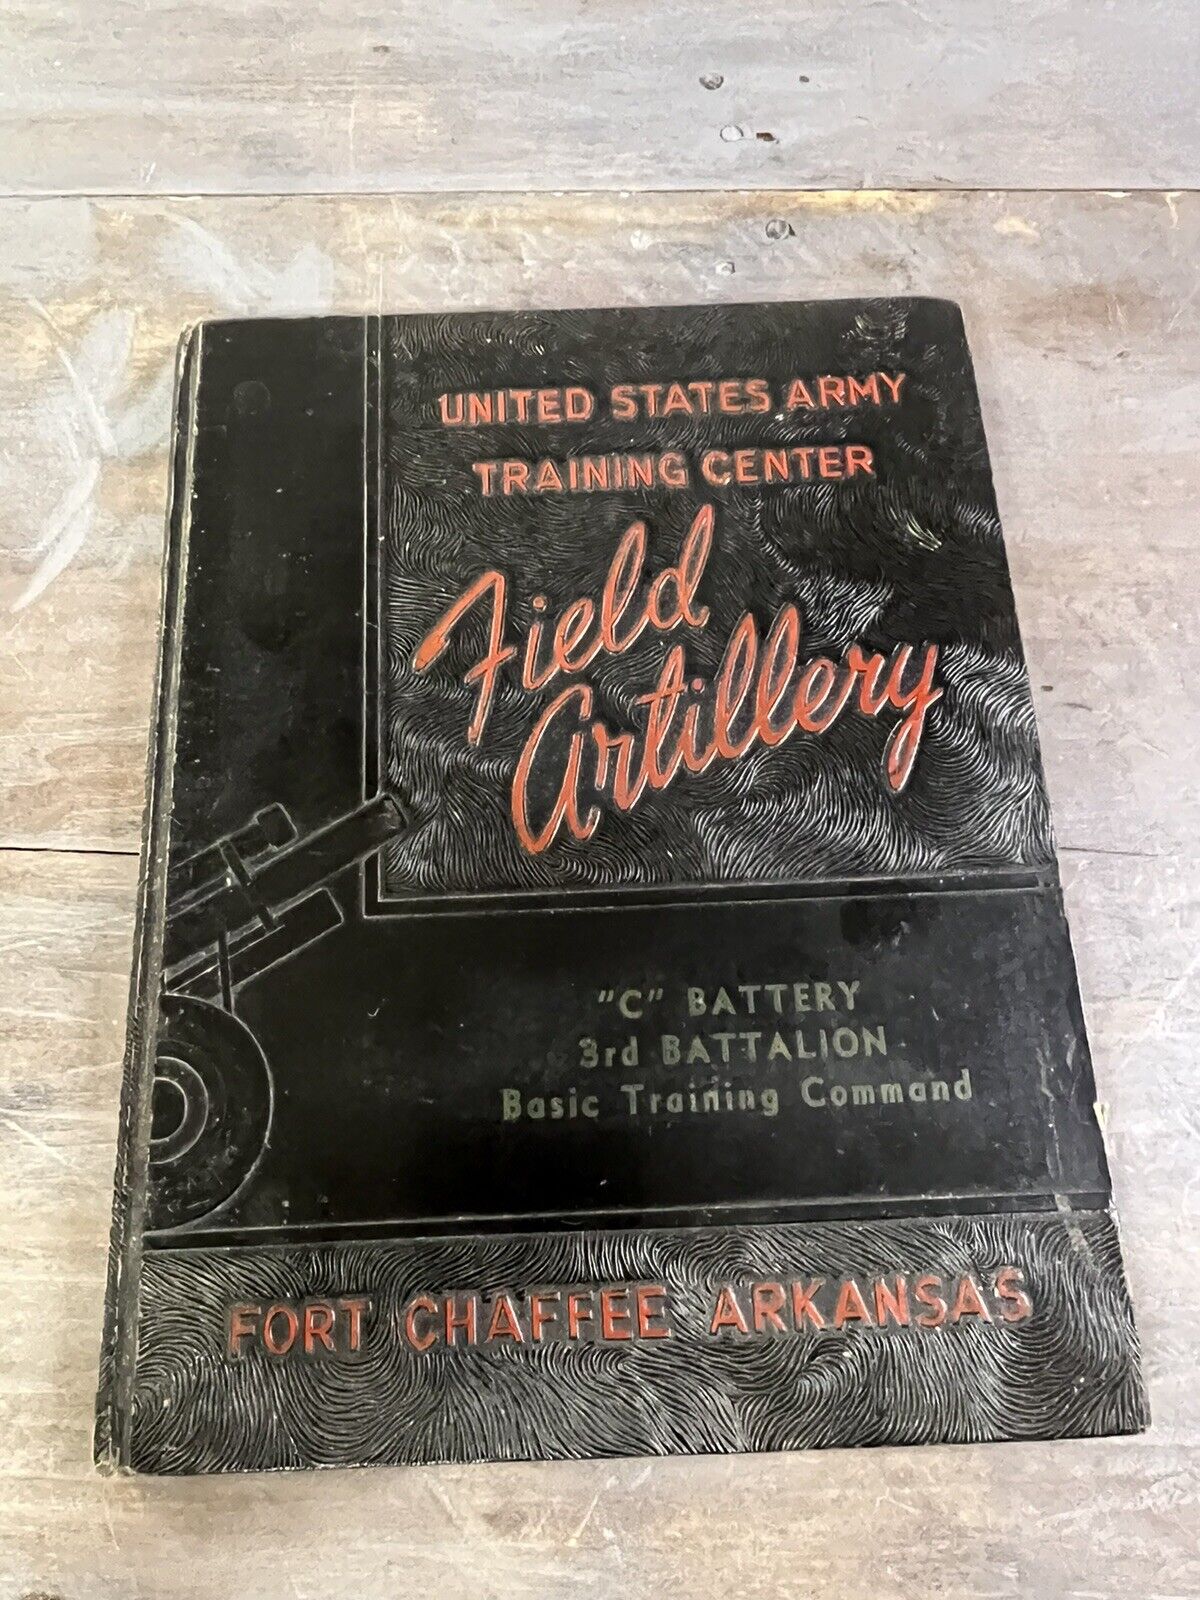 1960’s United States Army Training Center Year Book “C” Battery 3rd Battalion 